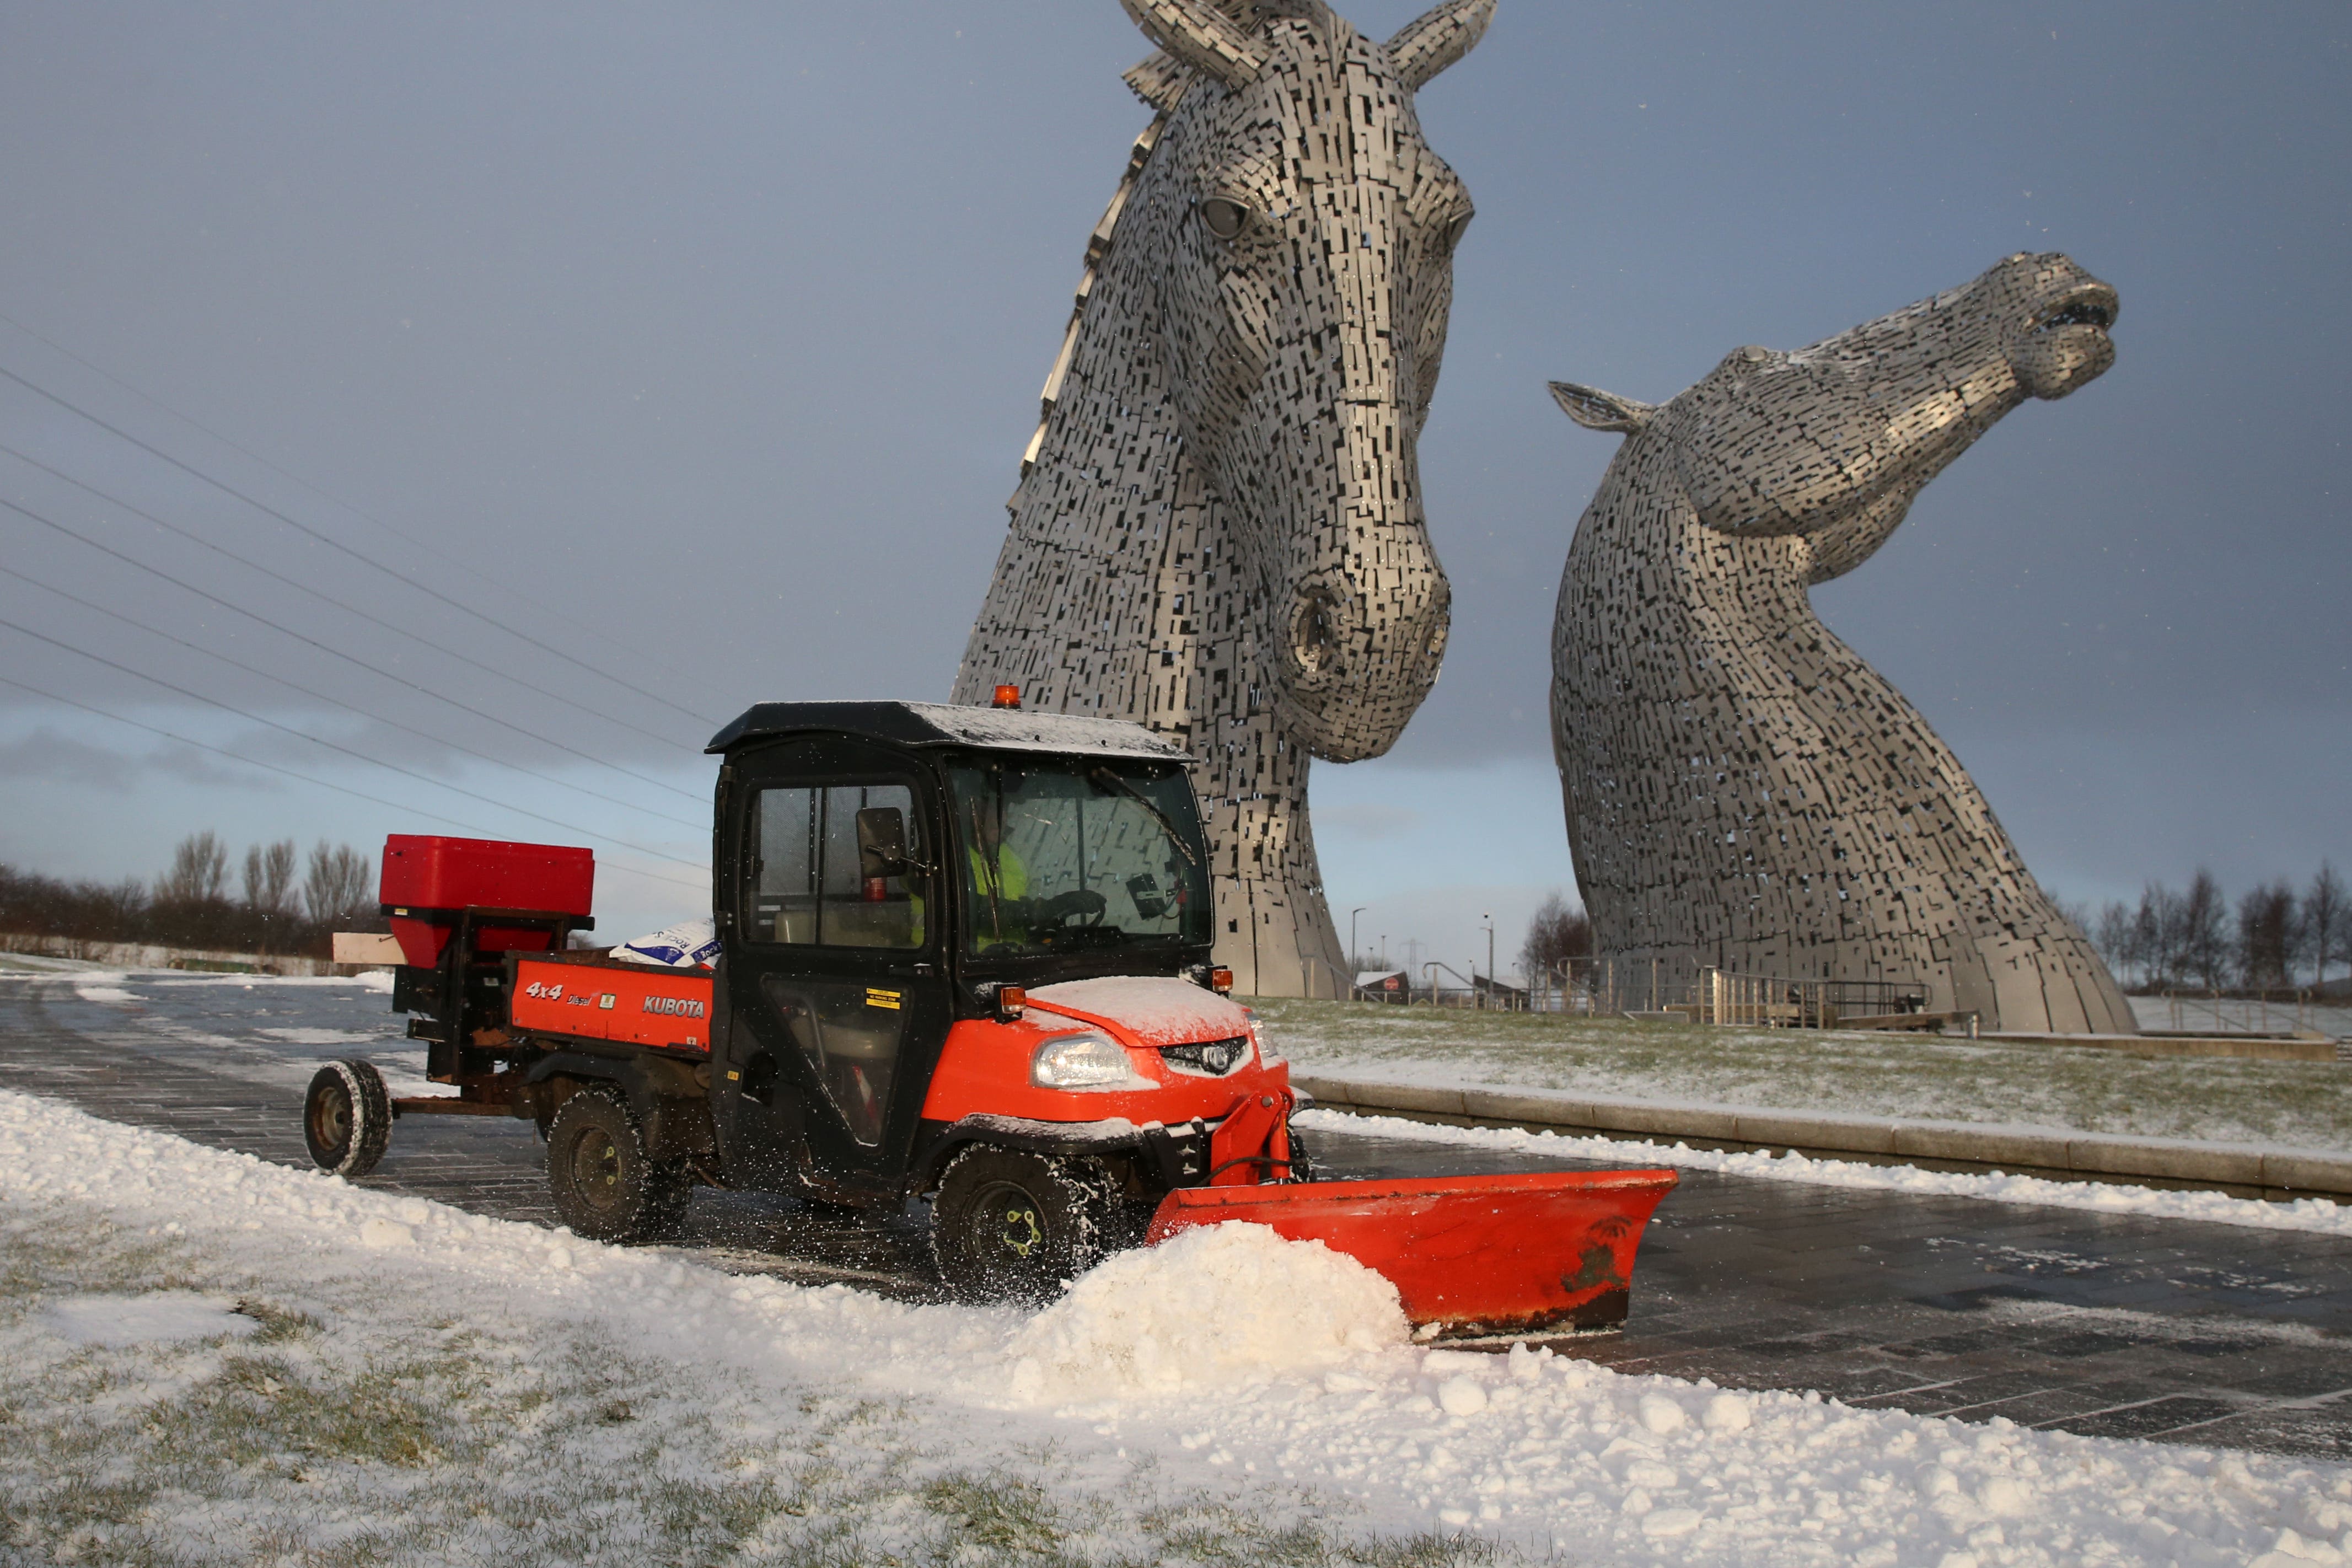 <p>A vehicle clears snow near the Kelpies in Falkirk</p>